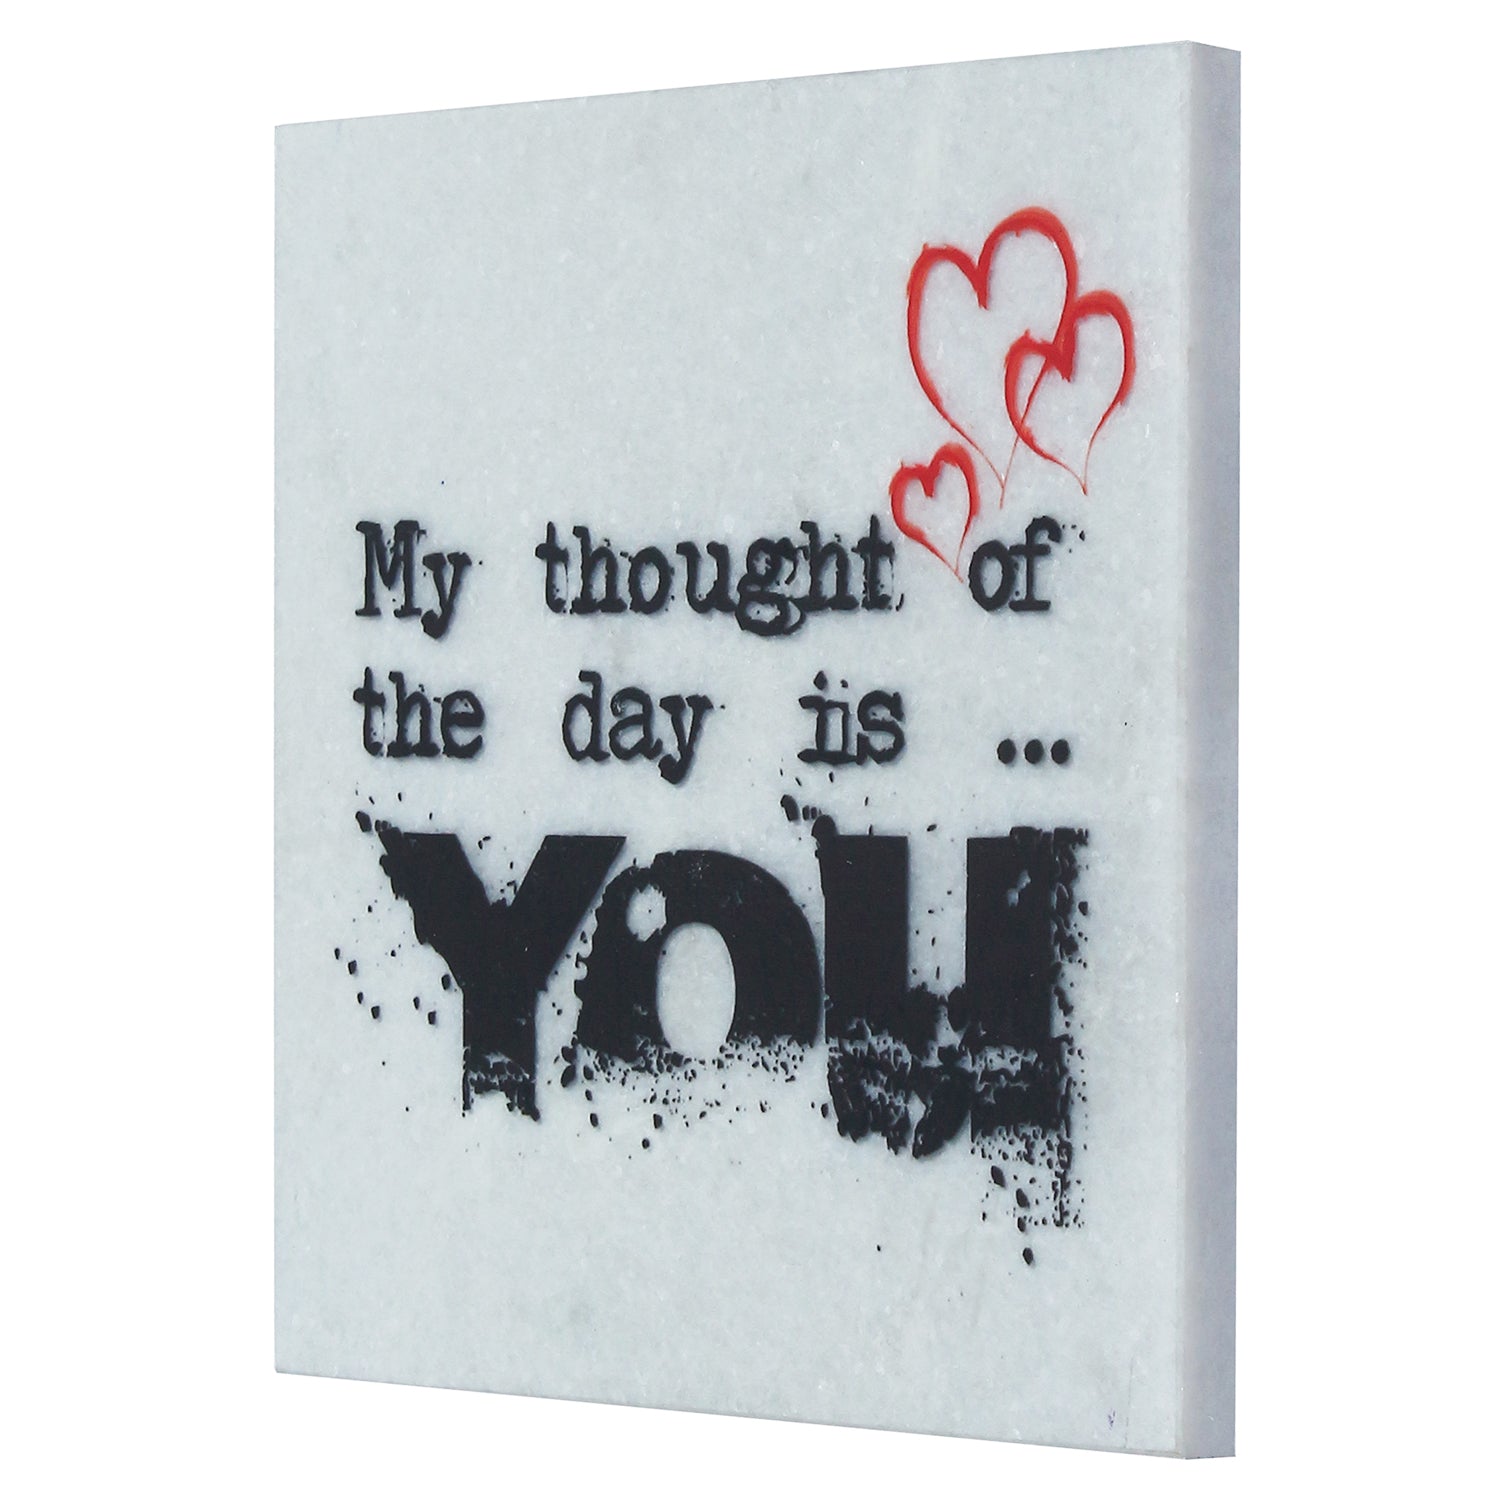 "My thought of the day is YOU" Quotation Painting On Marble Square Tile 4